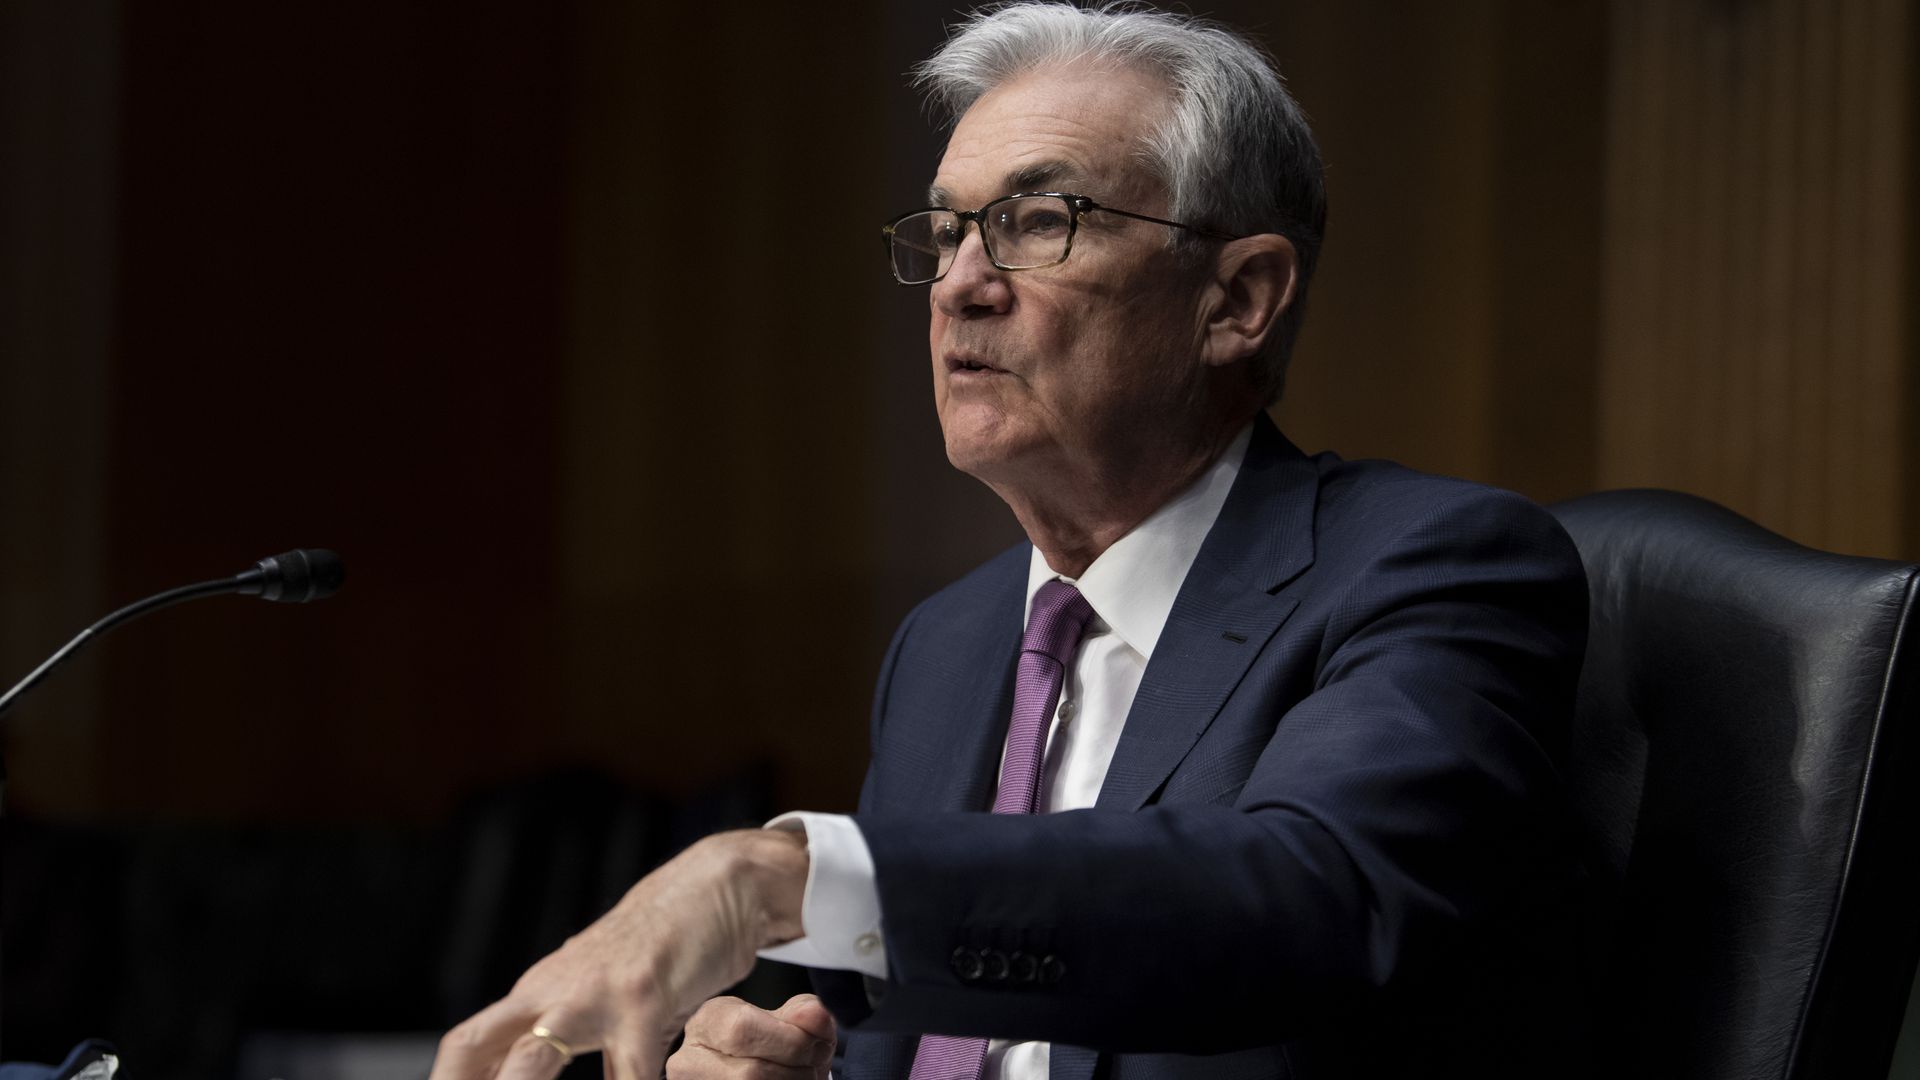 Fed Chair Jerome Powell at a hearing earlier this month. Photo: Brendan Smialowski-Pool/Getty Images